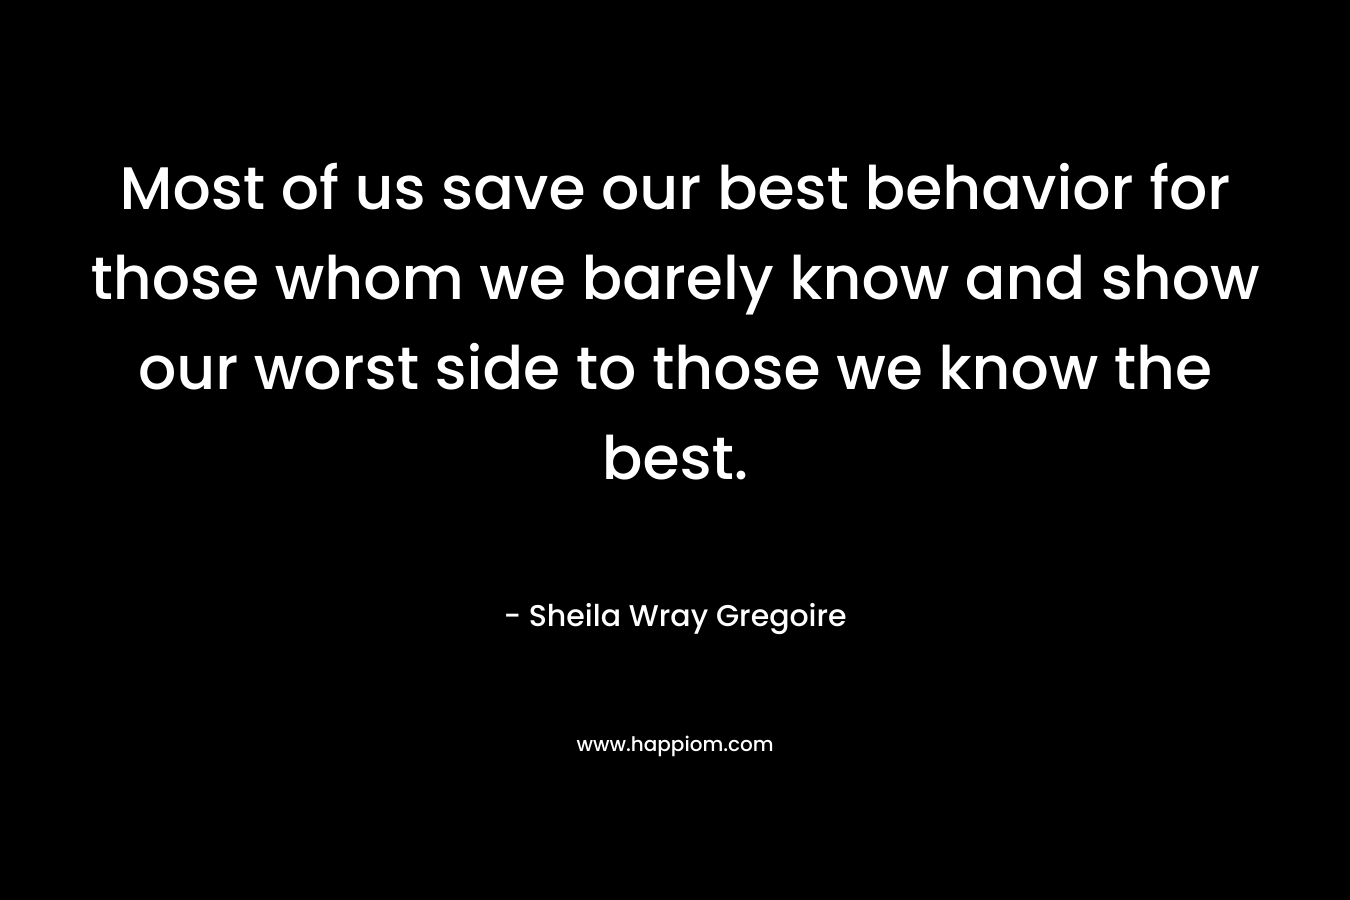 Most of us save our best behavior for those whom we barely know and show our worst side to those we know the best. – Sheila Wray Gregoire